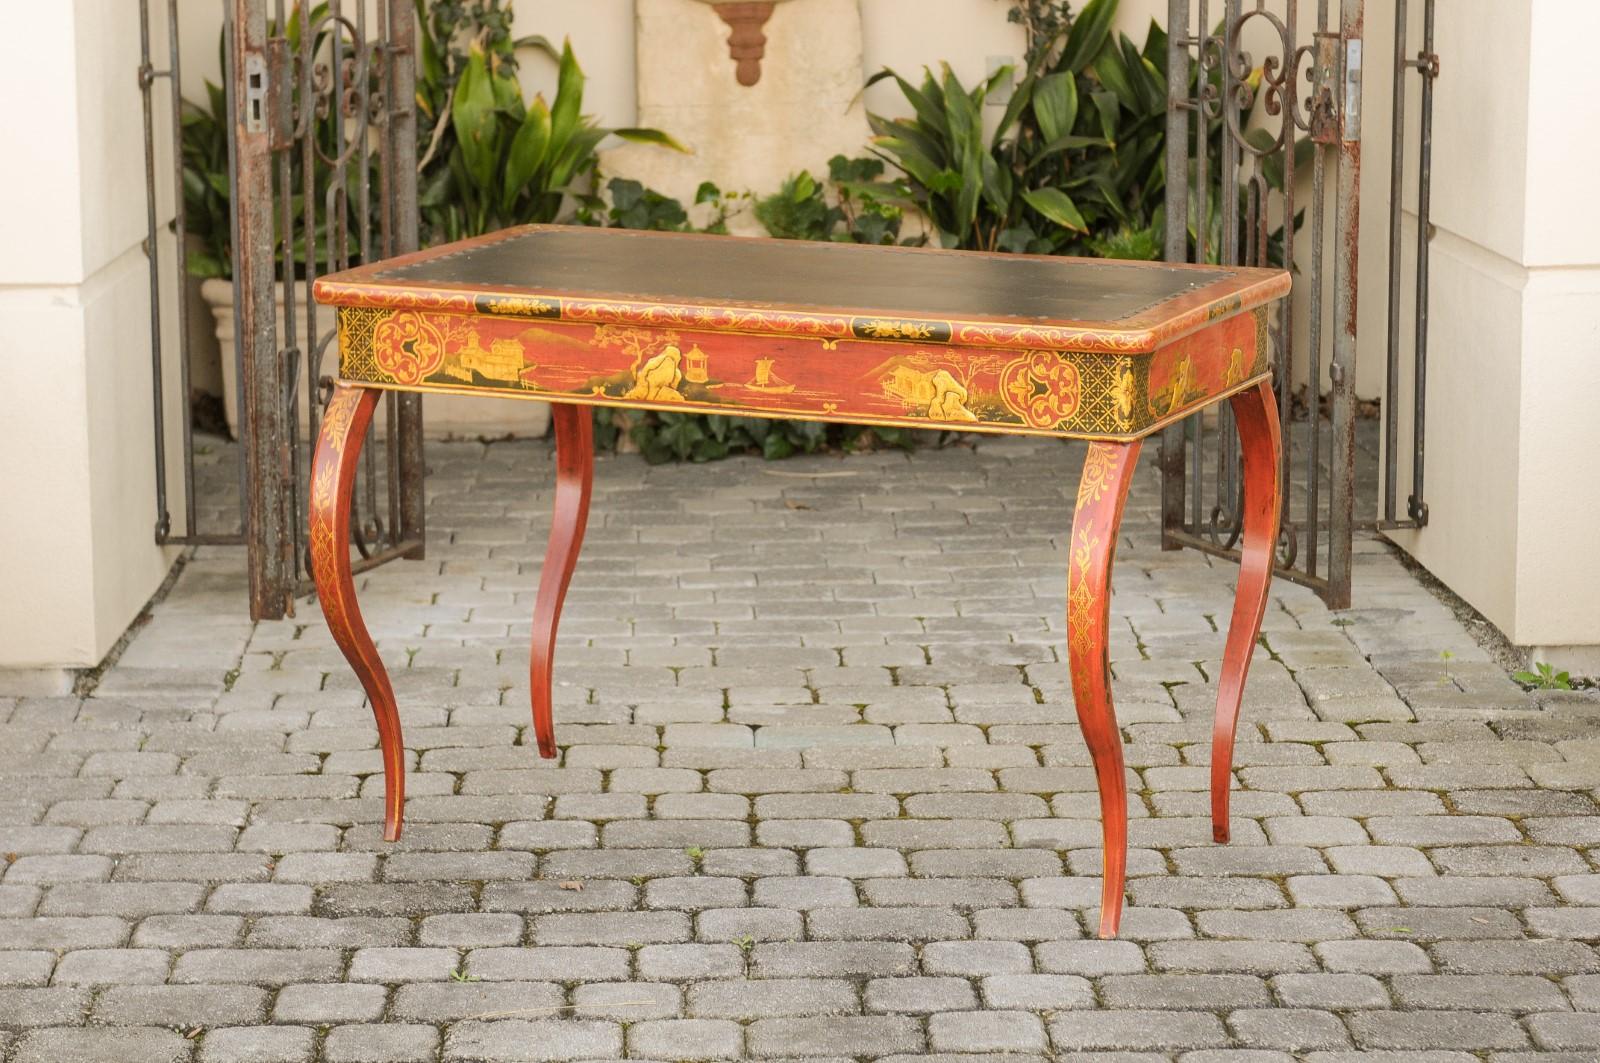 An English Regency period writing table from the early 19th century, with red lacquered, black and gilt chinoiserie decor and cabriole legs. Born in England in the early years of the Regency era, this exquisite table features a rectangular top with